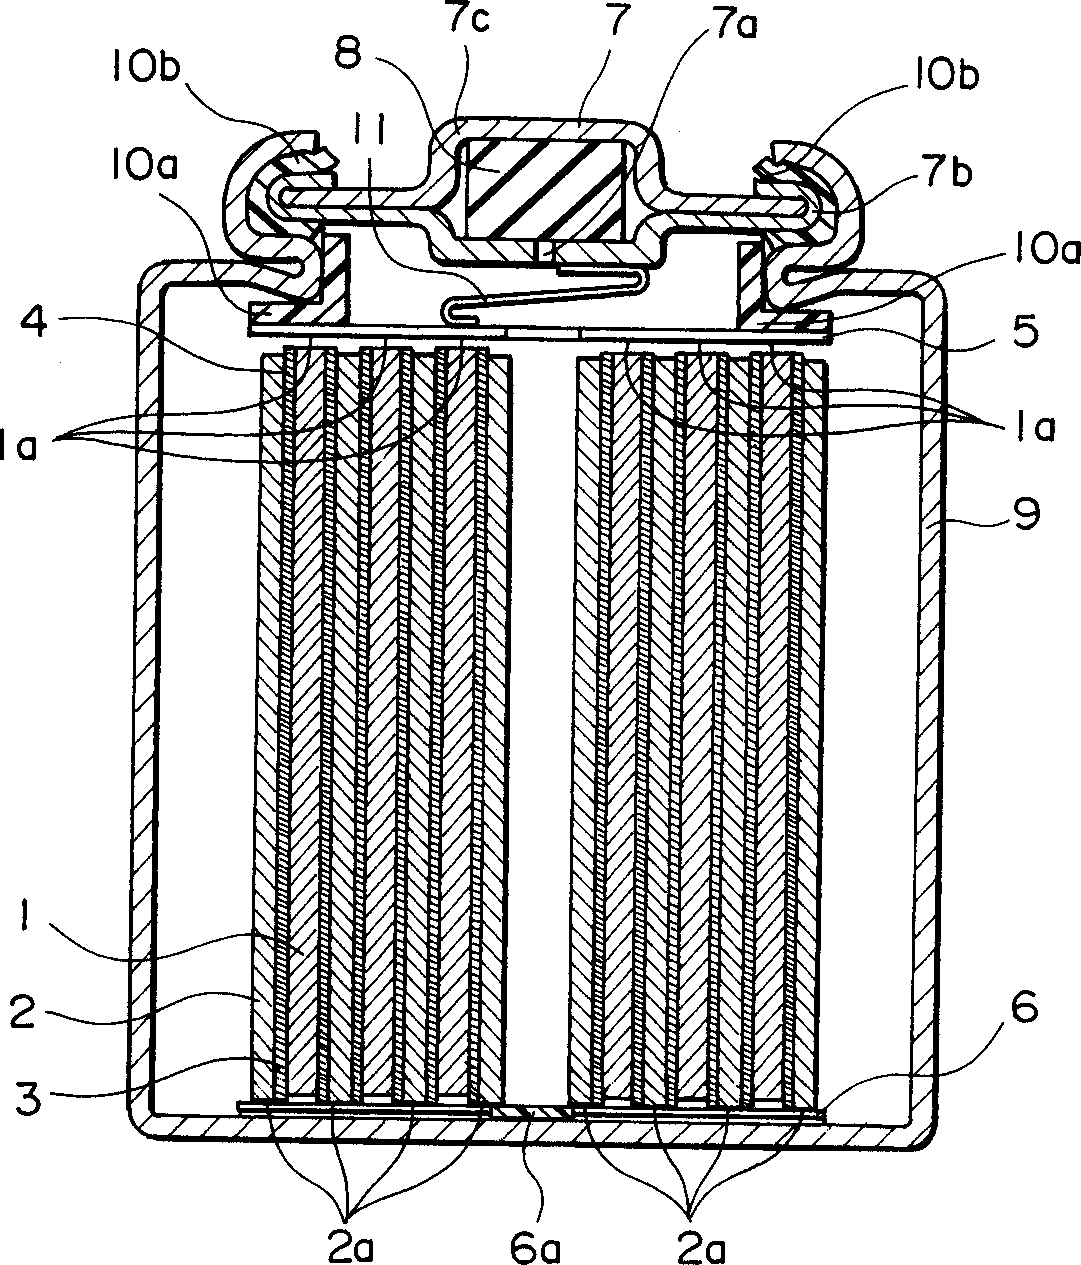 A battery, process for producing battery, process for producing battery case and battery pack